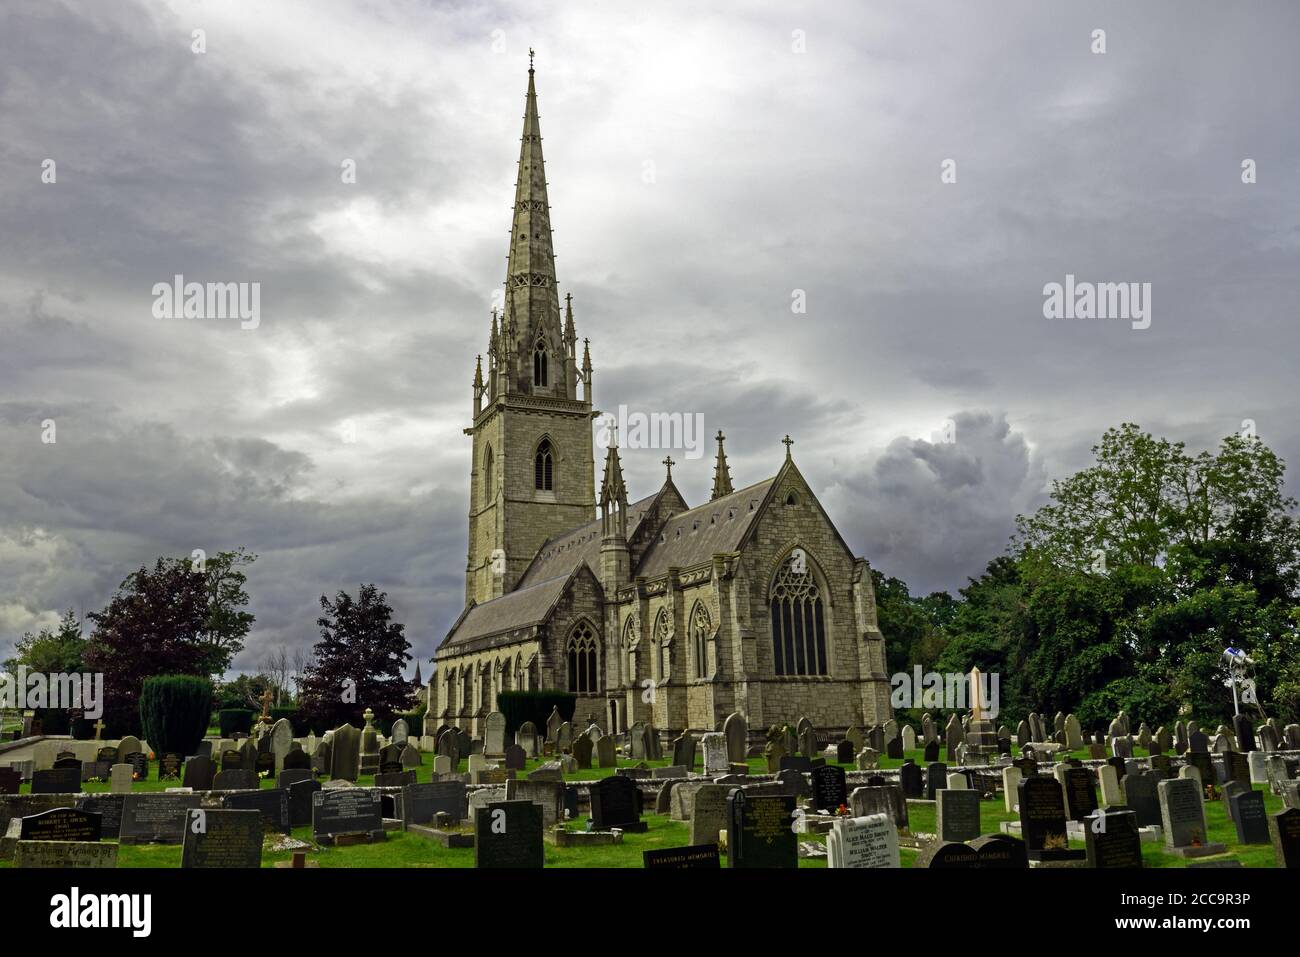 St Margaret's Church (The Marble Church) in Bodelwyddan, North Wales ...